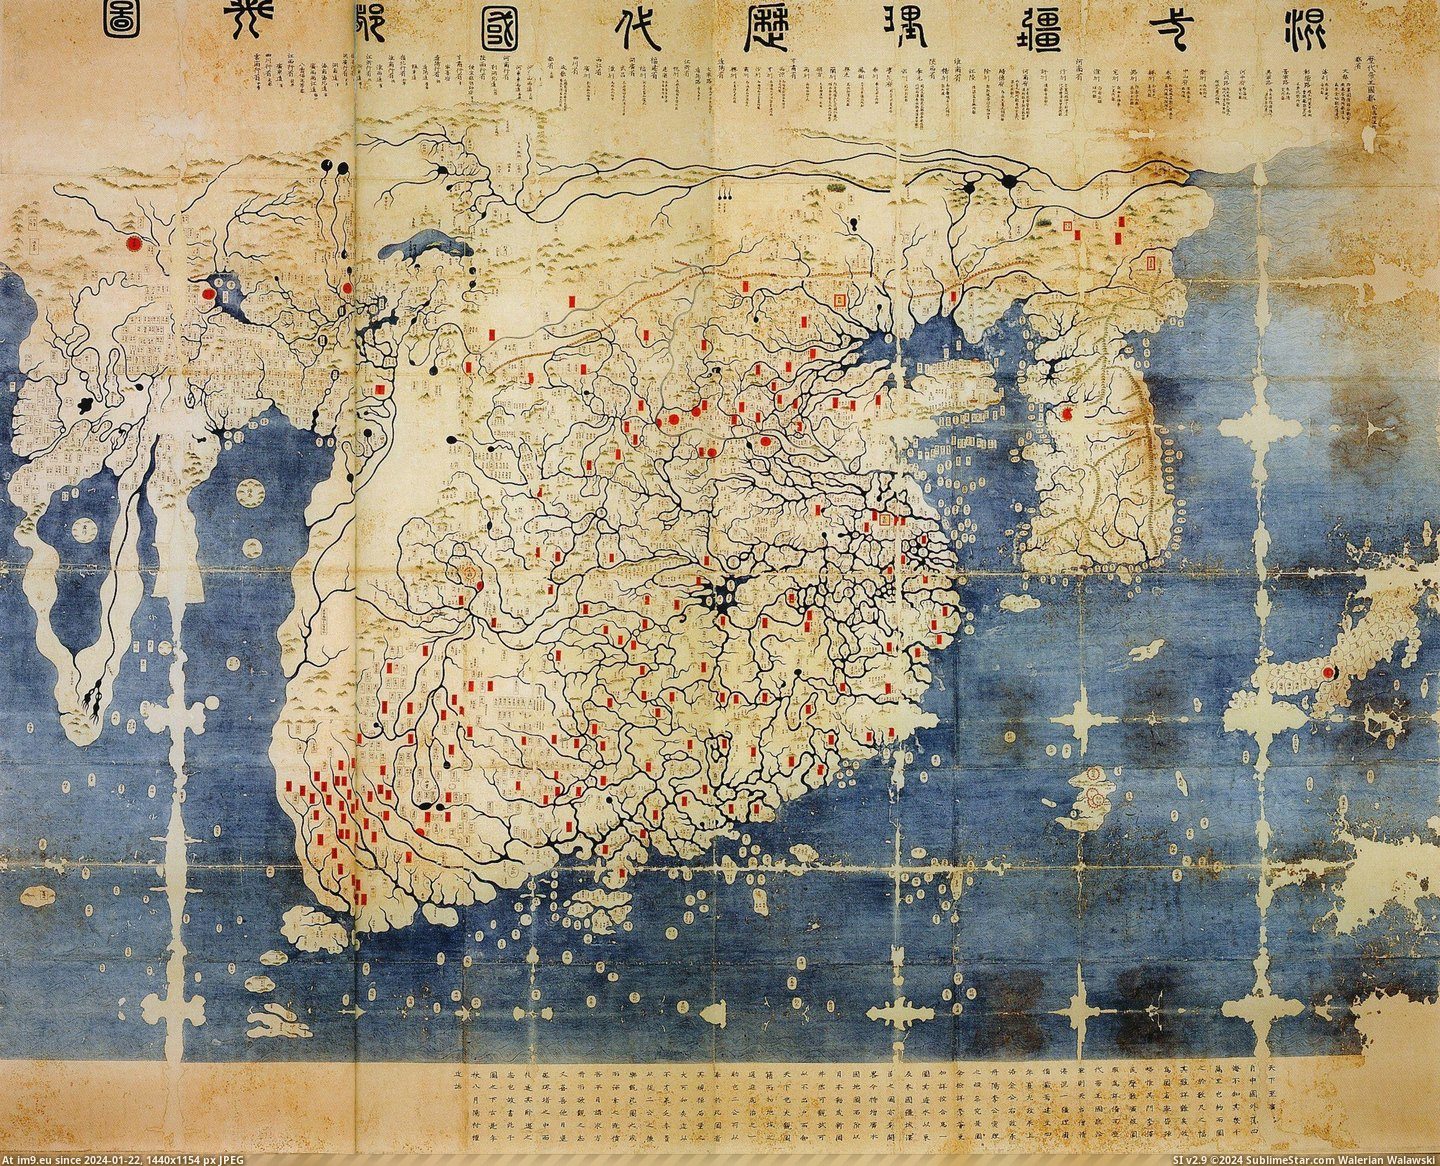 #World #Map #Temple #Alternate #15th #Korean #Century [Mapporn] Kangnido: An alternate version of the 15th century Korean map of the world, rediscovered in a Nagasaki temple in 1998. Pic. (Image of album My r/MAPS favs))